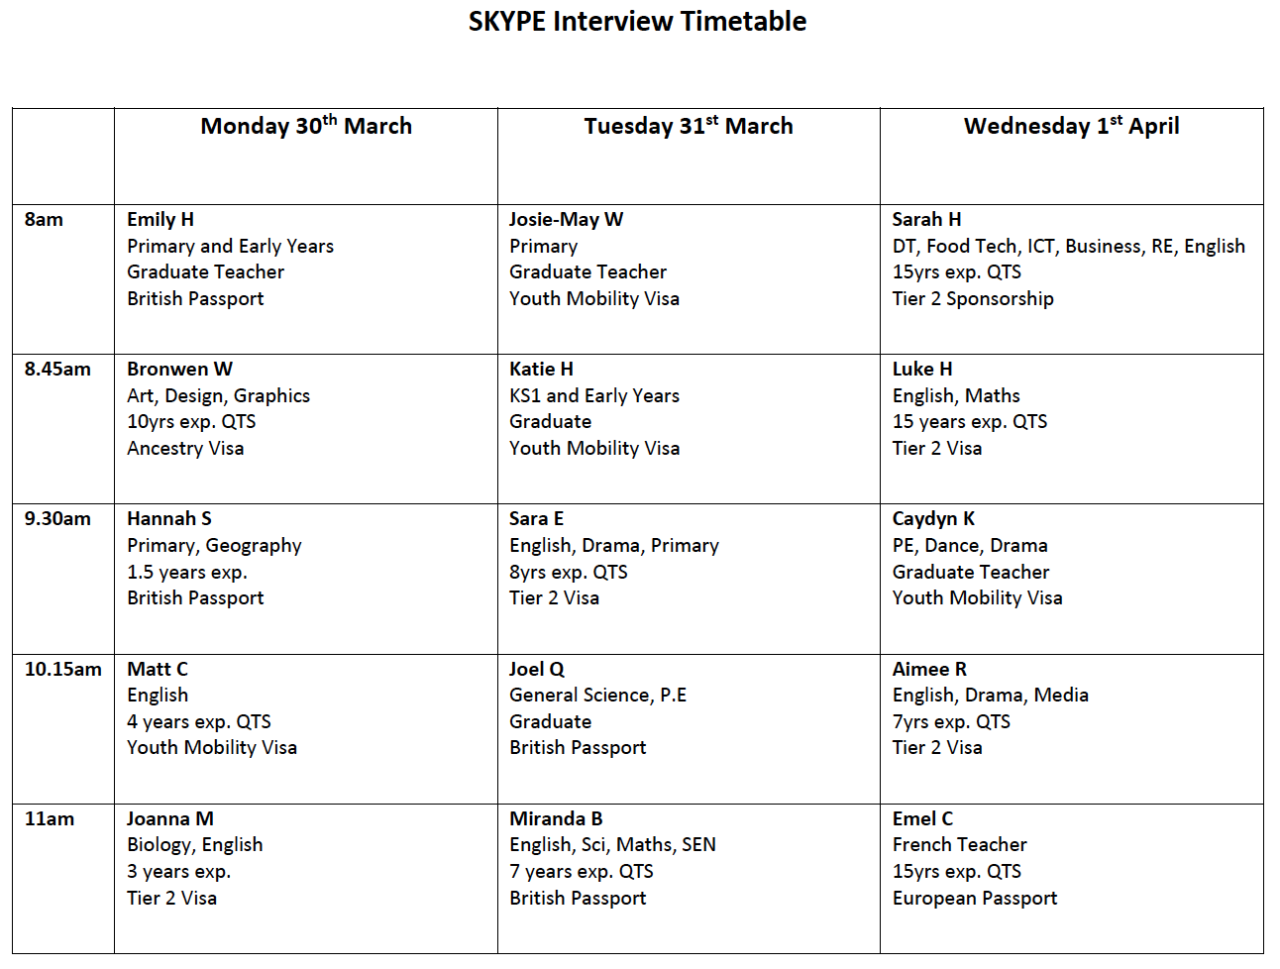 Skype Interview timetable example